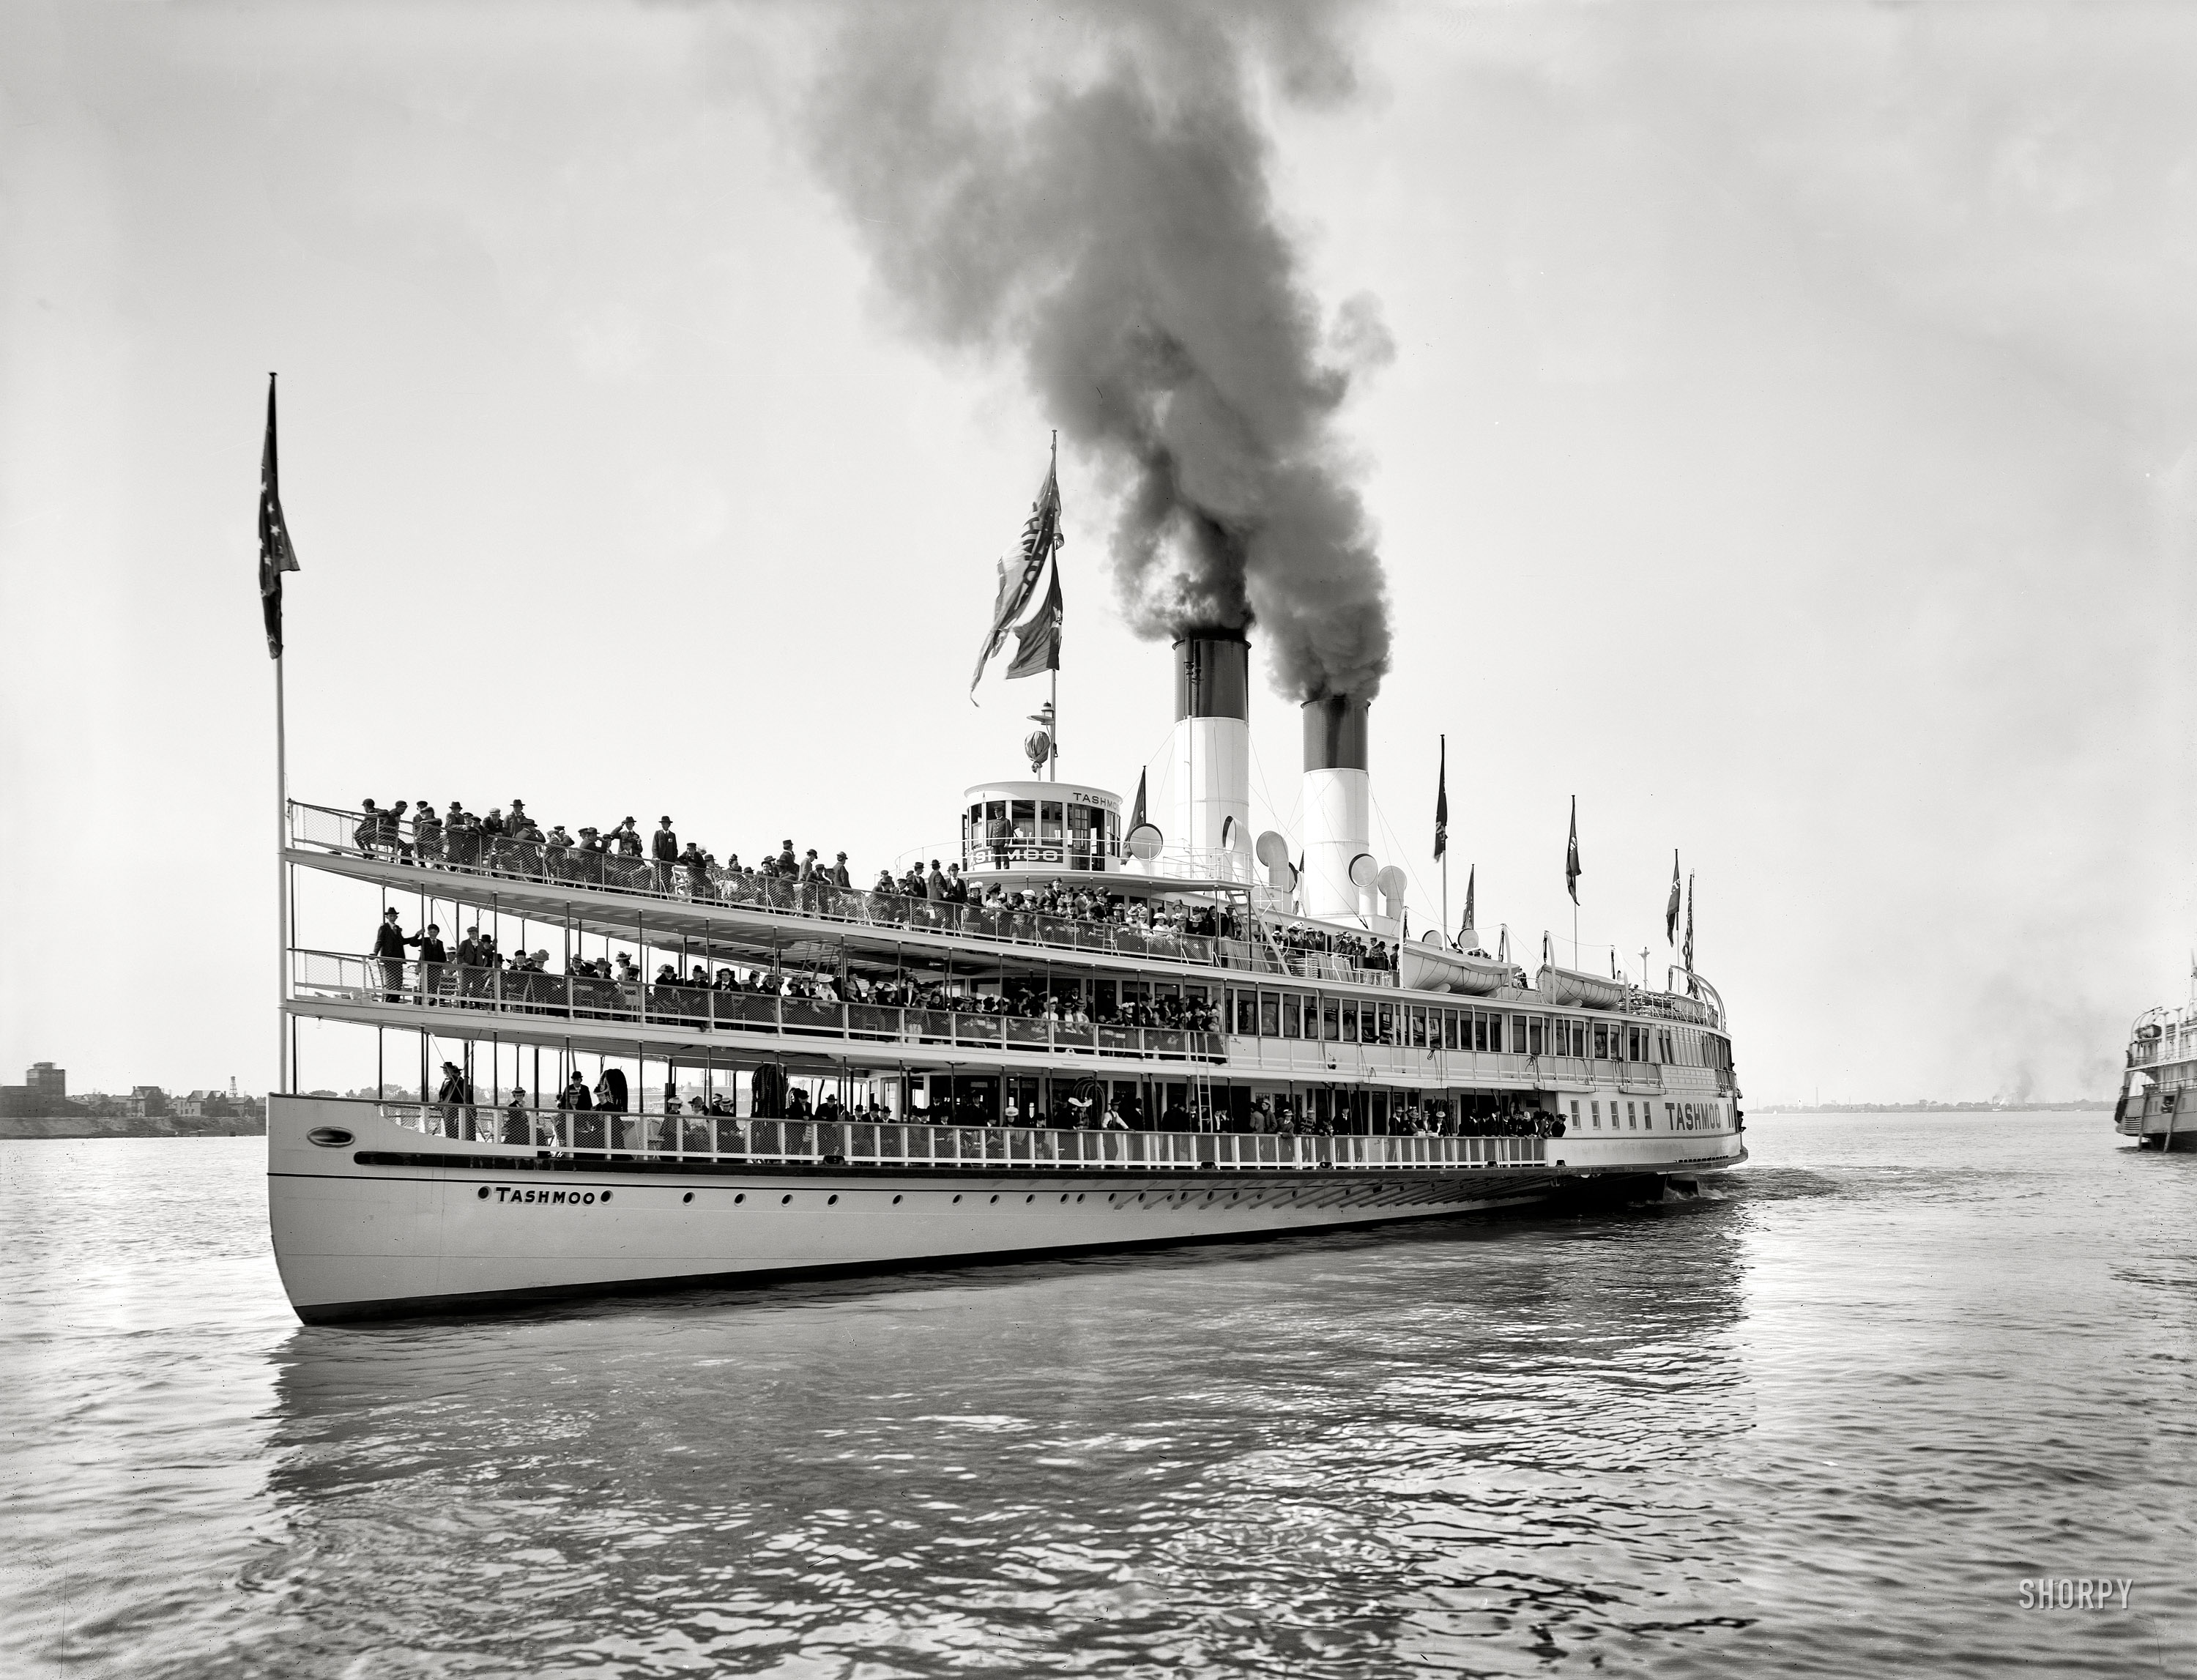 Circa 1901. "Sidewheeler Tashmoo." Our fourth look at the popular excursion steamer, which plied the Detroit River between Detroit and Port Huron. 8x10 inch glass negative by Lycurgus S. Glover, Detroit Publishing Co. View full size.